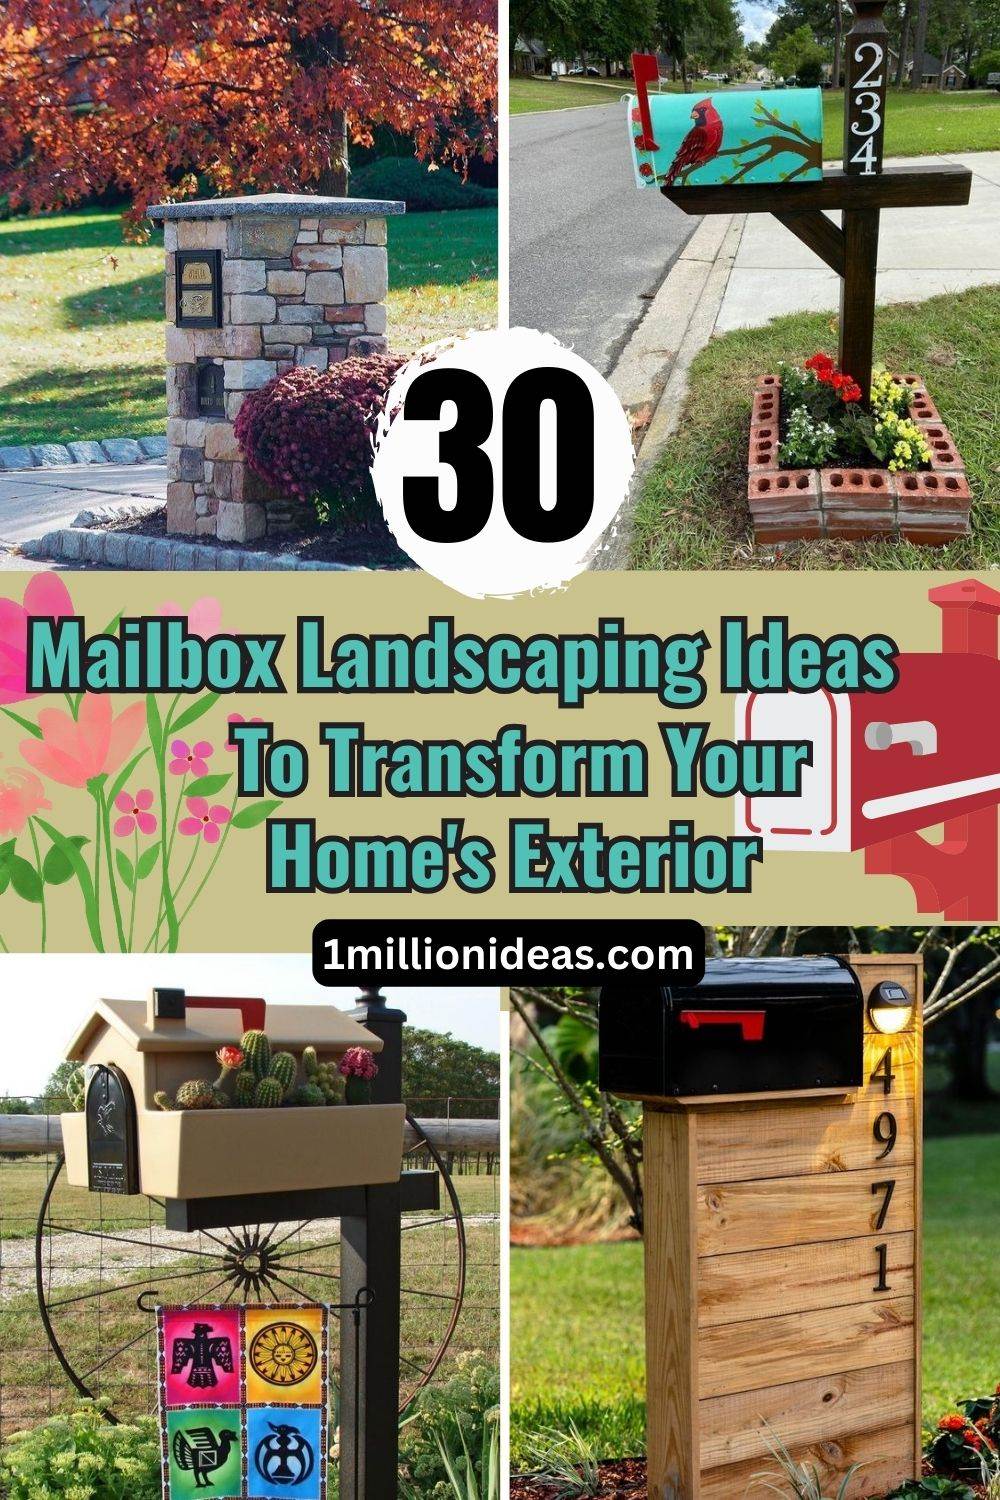 30 Mailbox Landscaping Ideas To Transform Your Home's Exterior - 191